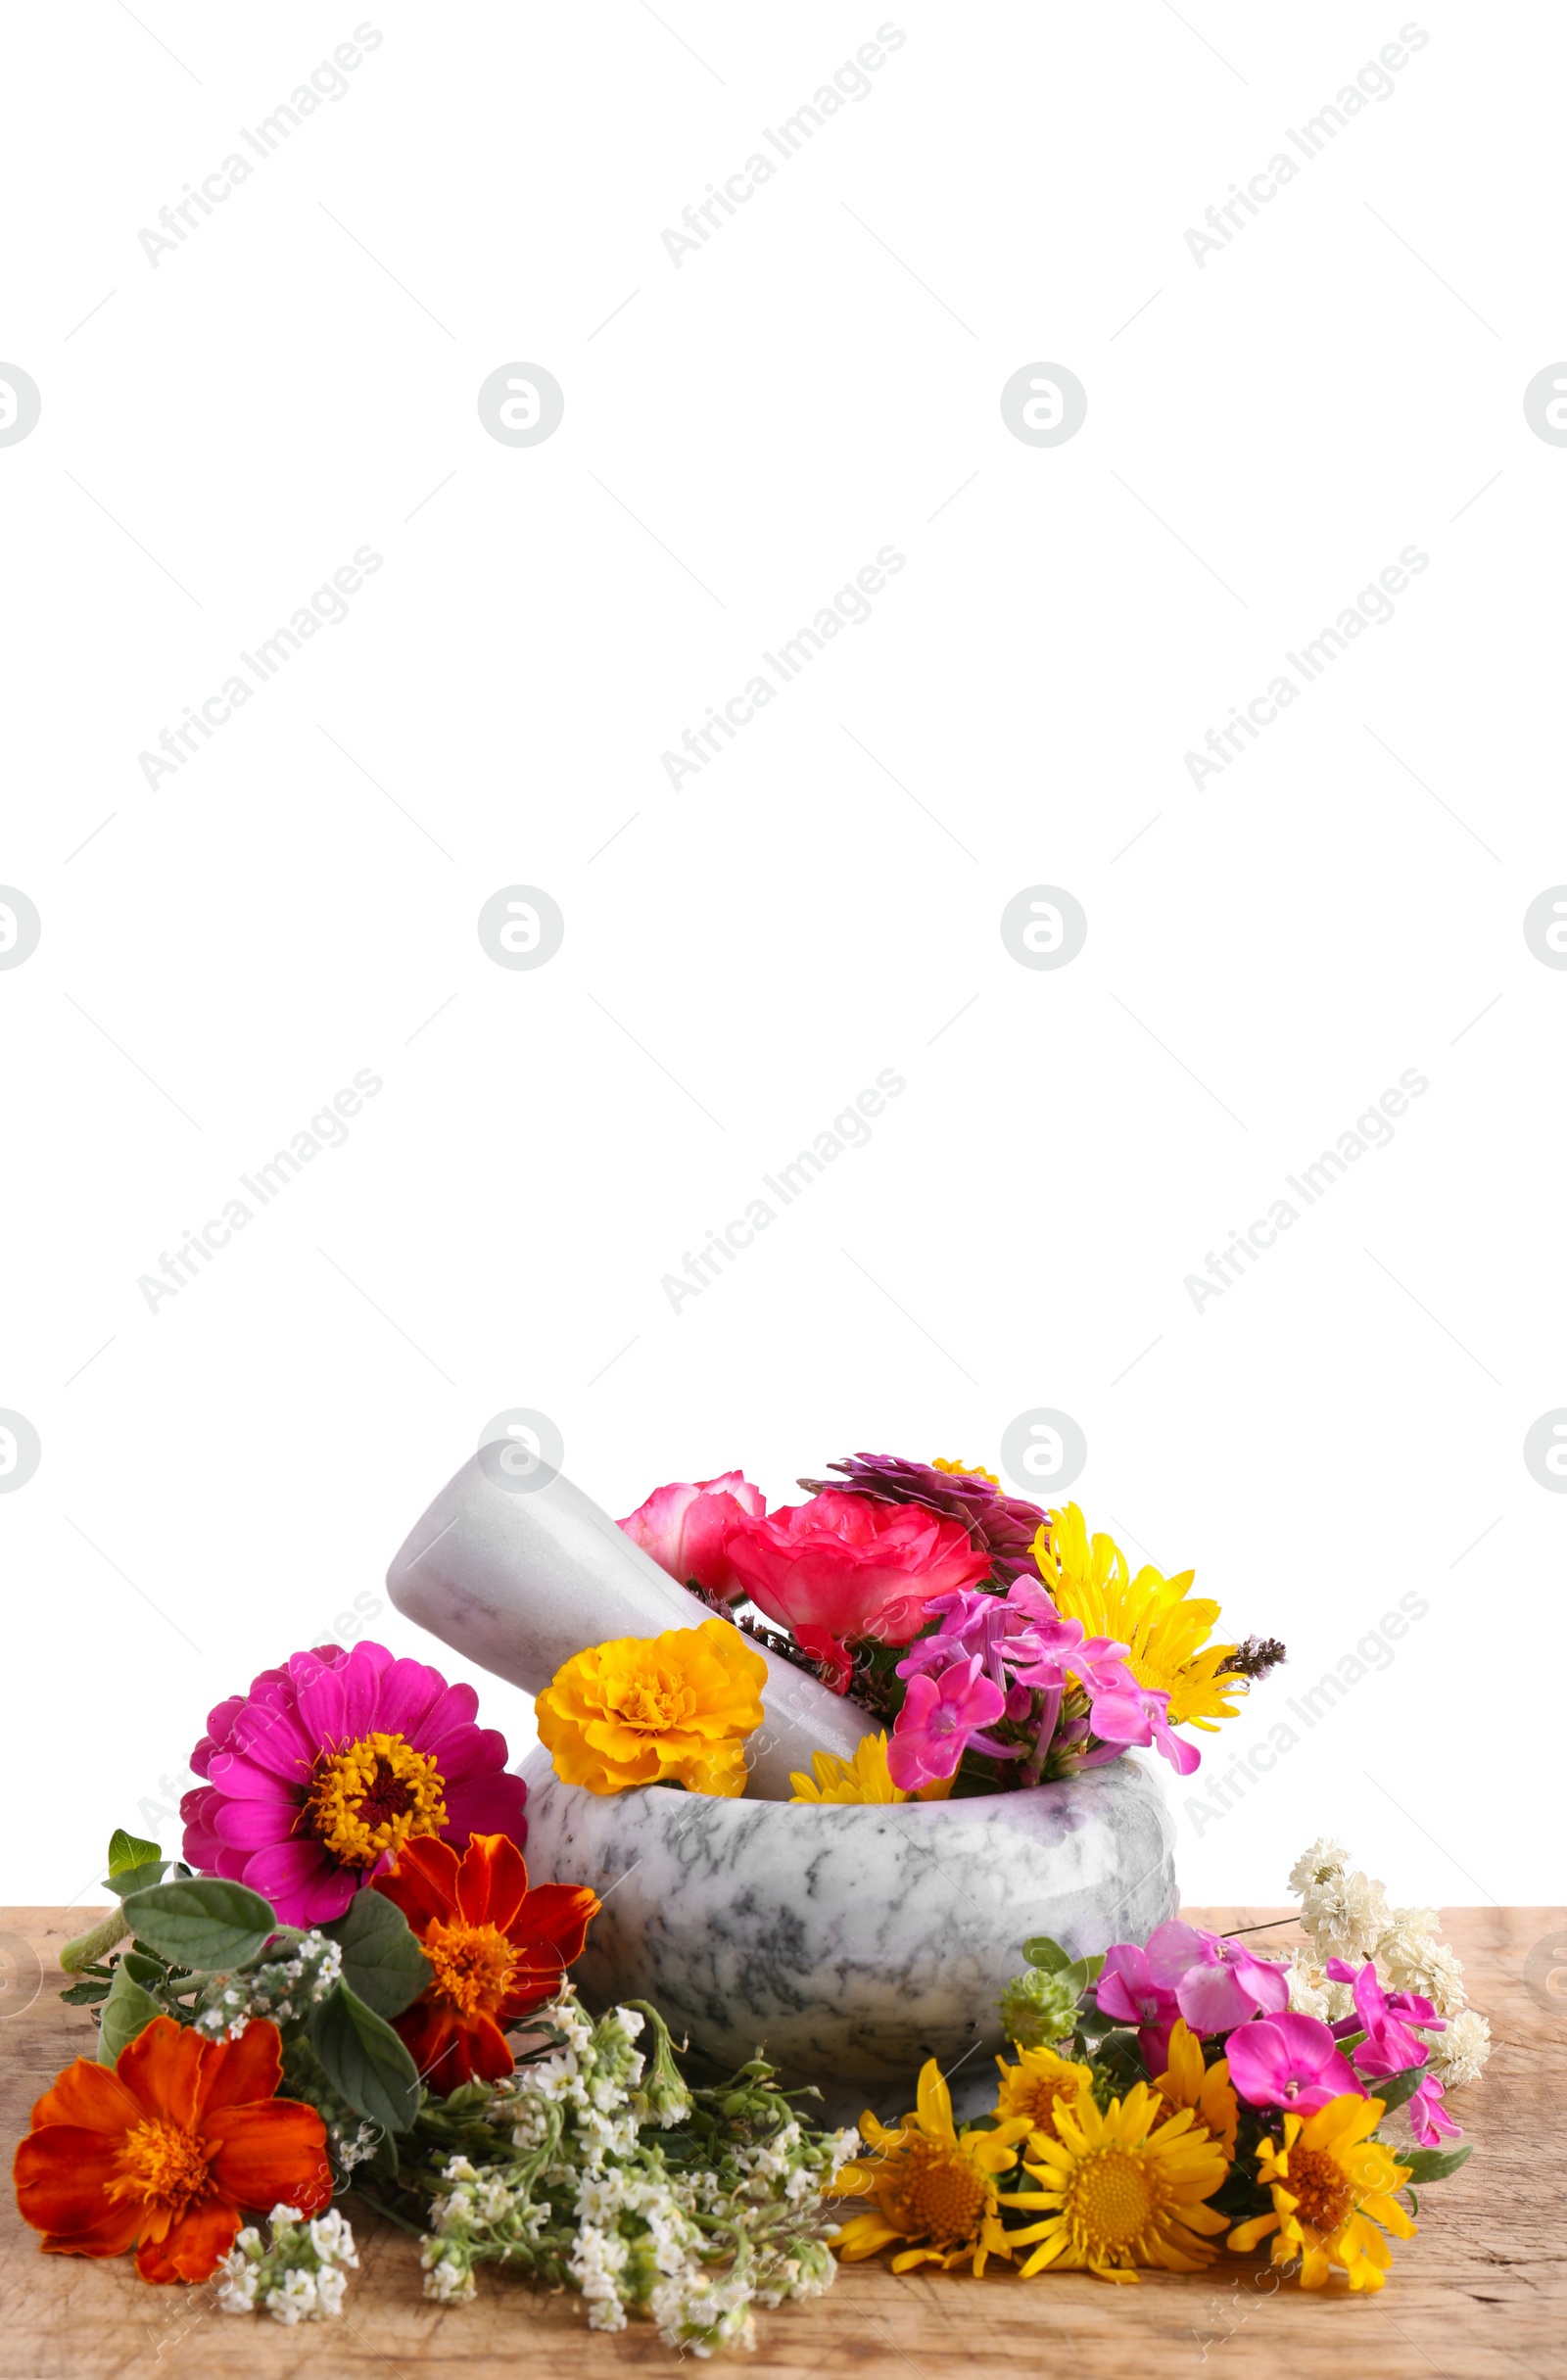 Photo of Marble mortar, pestle and different flowers on wooden table against white background. Space for text